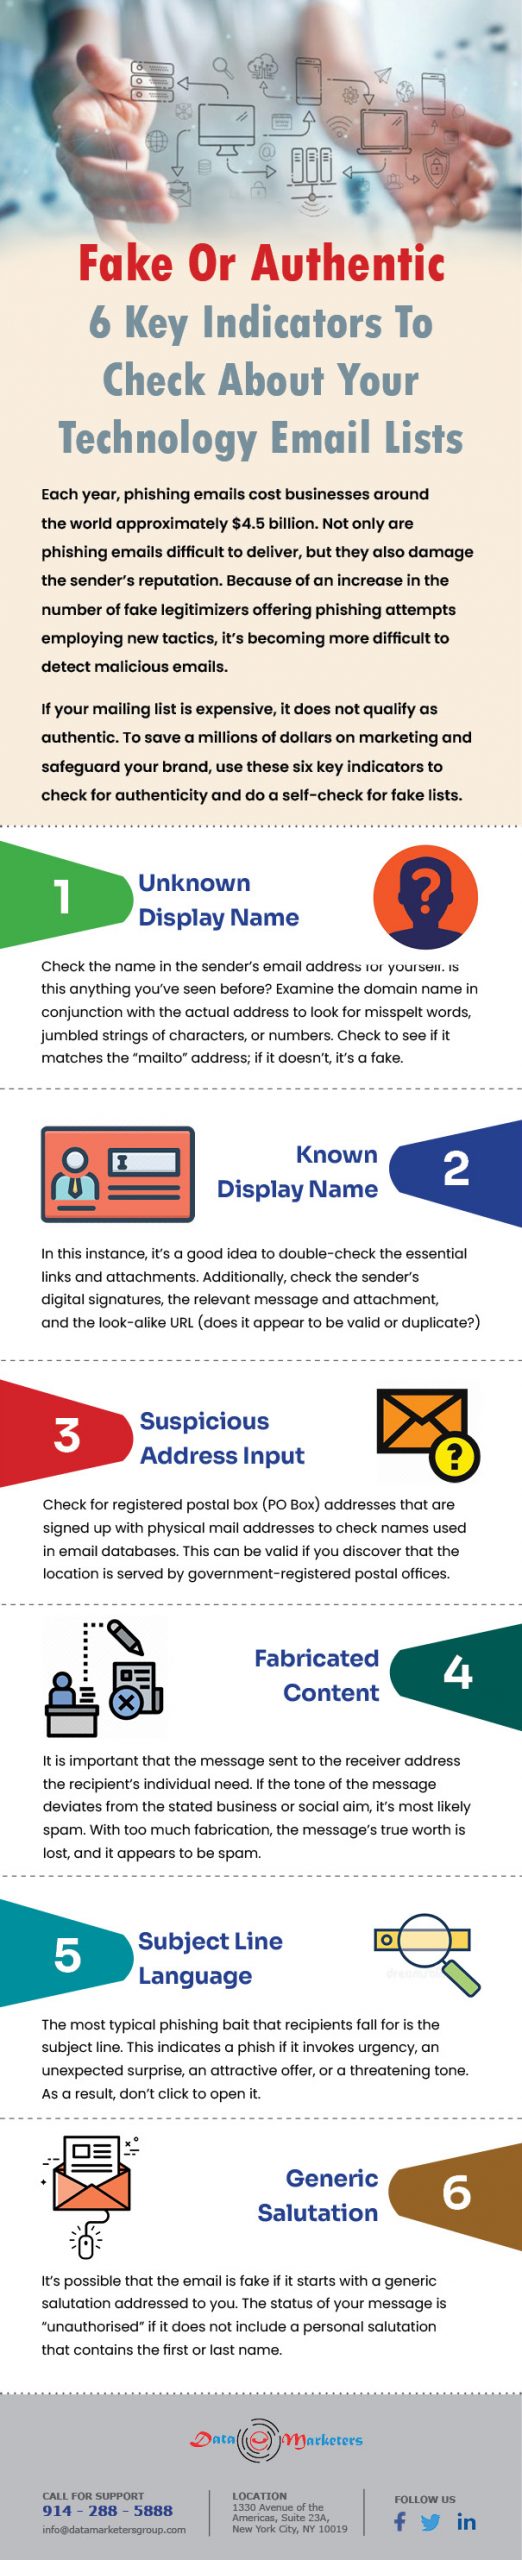 Fake Or Authentic 6 Key Indicators To Check About Your Technology Email Lists | Data Marketers Group